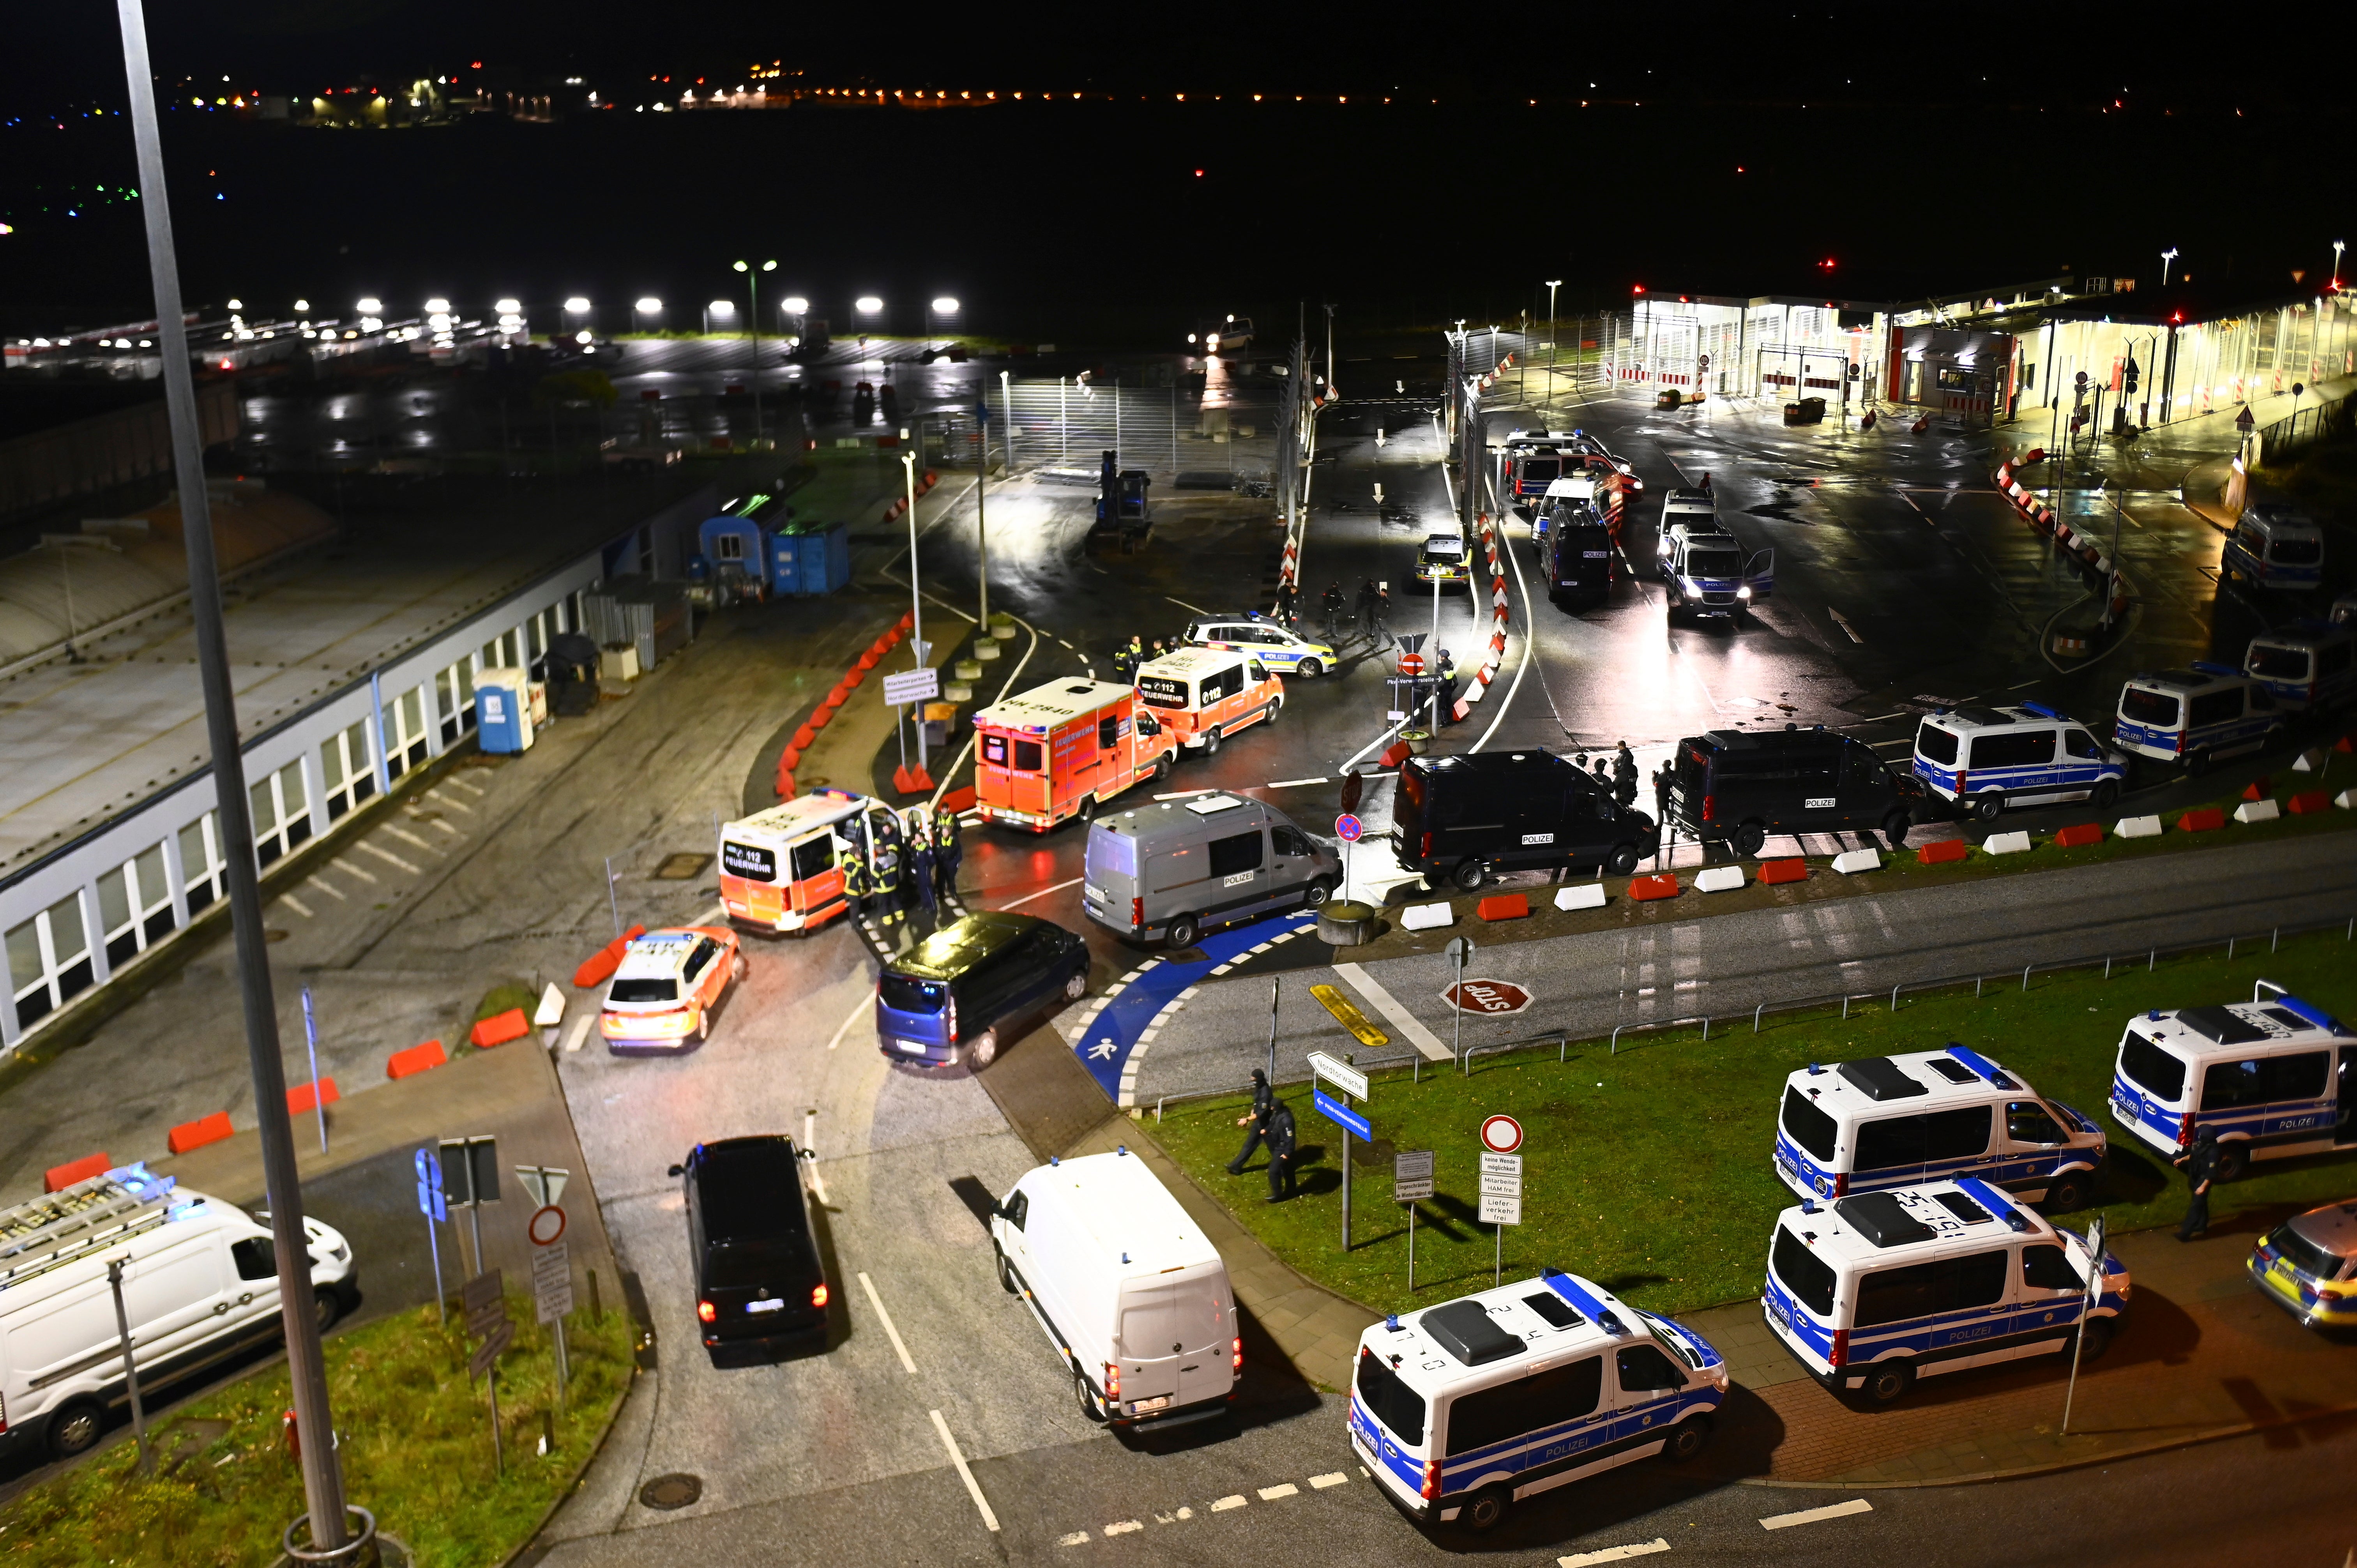 <p>Police vehicles and ambulances arrive at Hamburg airport after an armed man drove through a gate</p>